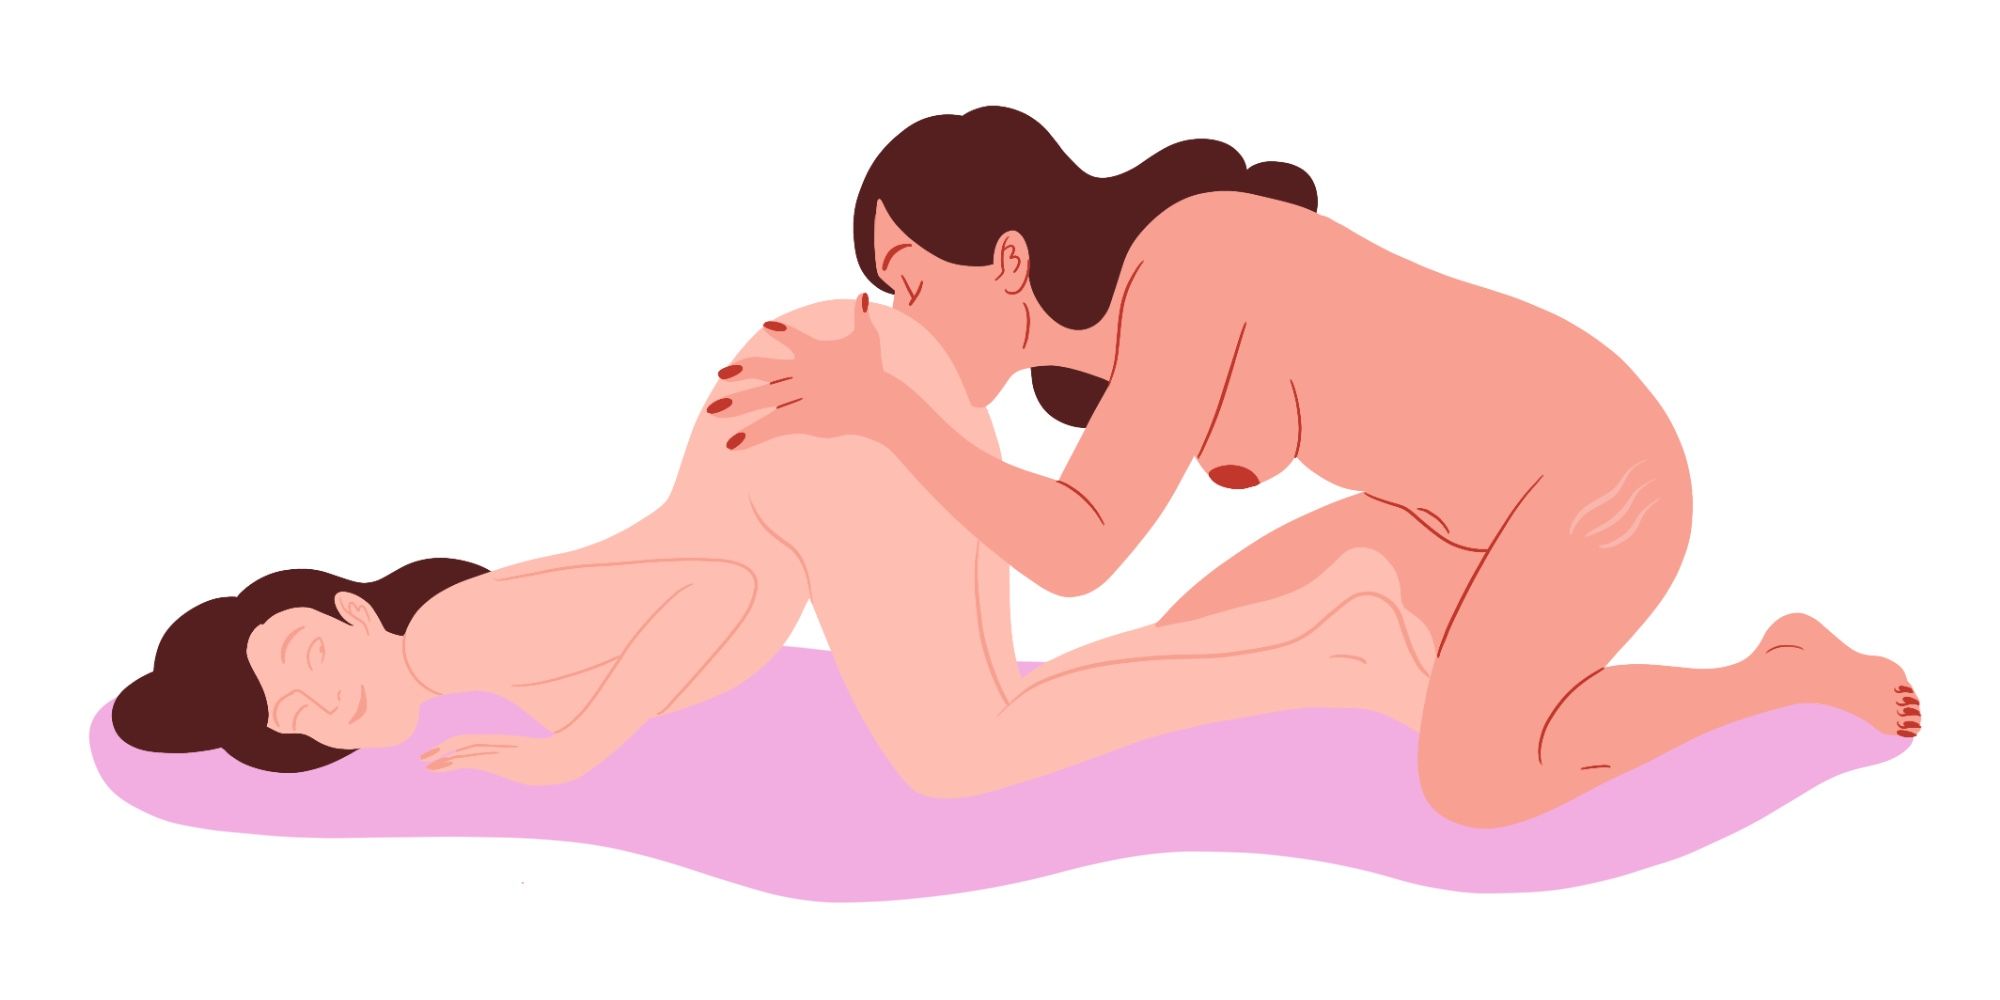 Frog sex position